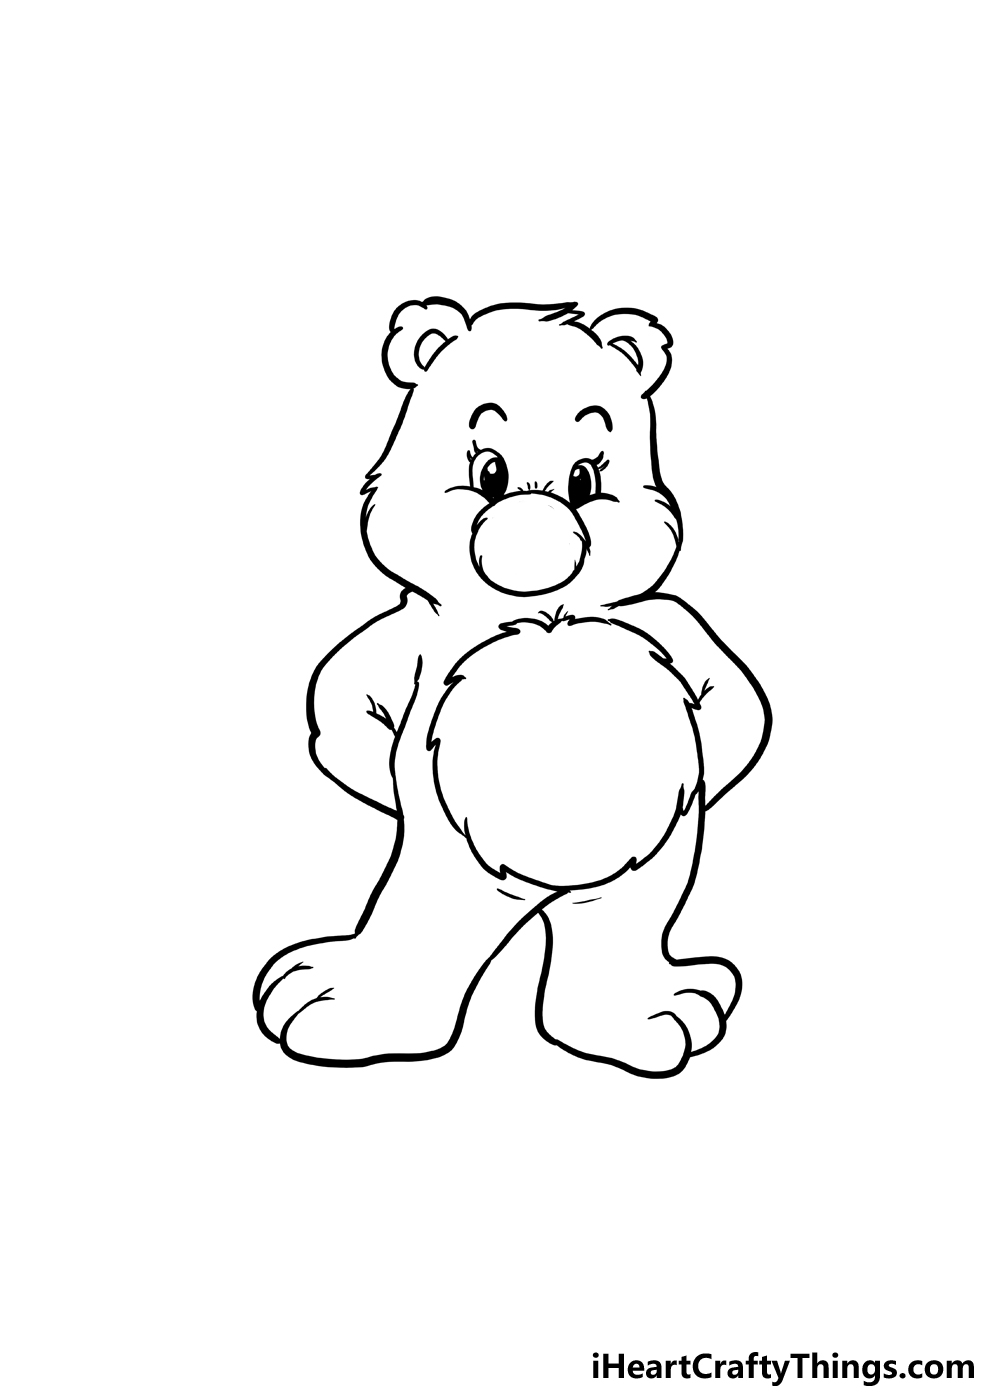 How to Draw A Care Bear step 4